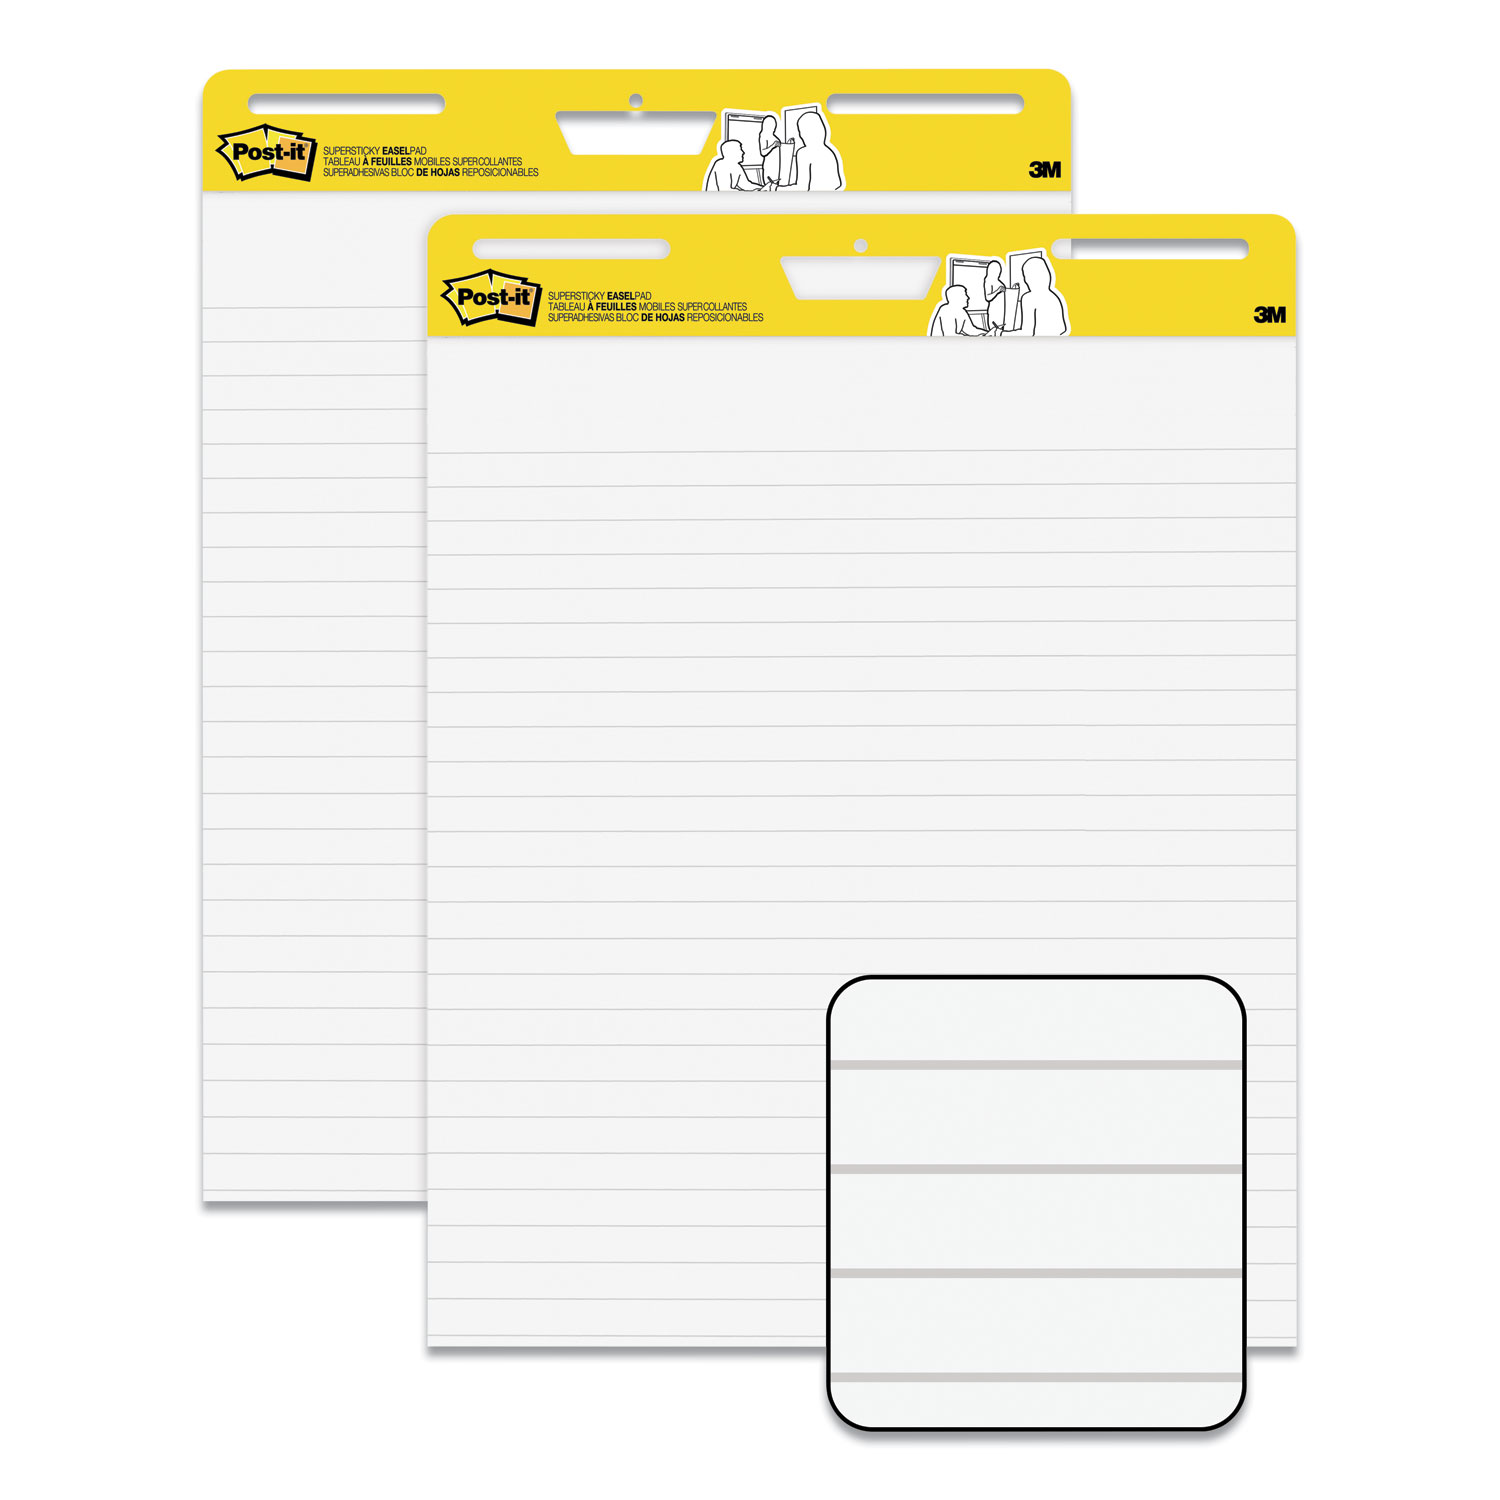  Post-it Easel Pads Super Sticky 561WL VAD 2PK Self-Stick Easel Pads, Ruled 1 1/2, 25 x 30, White, 30 Sheets, 2/Carton (MMM561WLVAD2PK) 